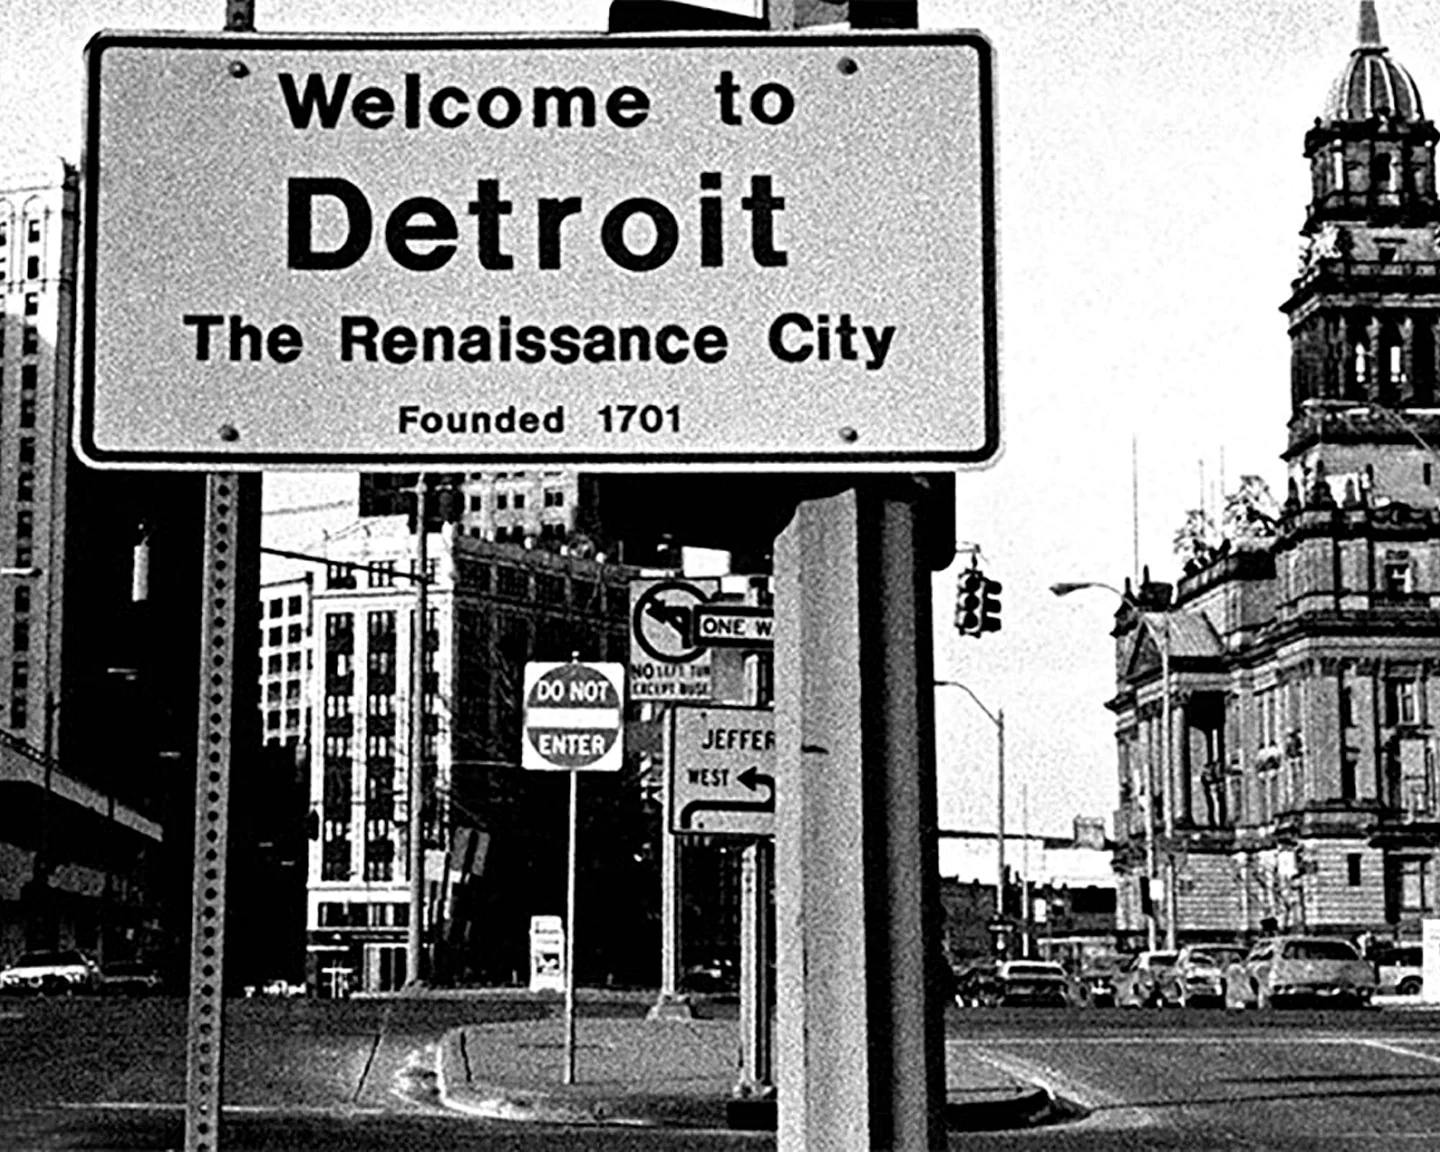 FROM THE ARCHIVES: DETROIT ROCK CITY